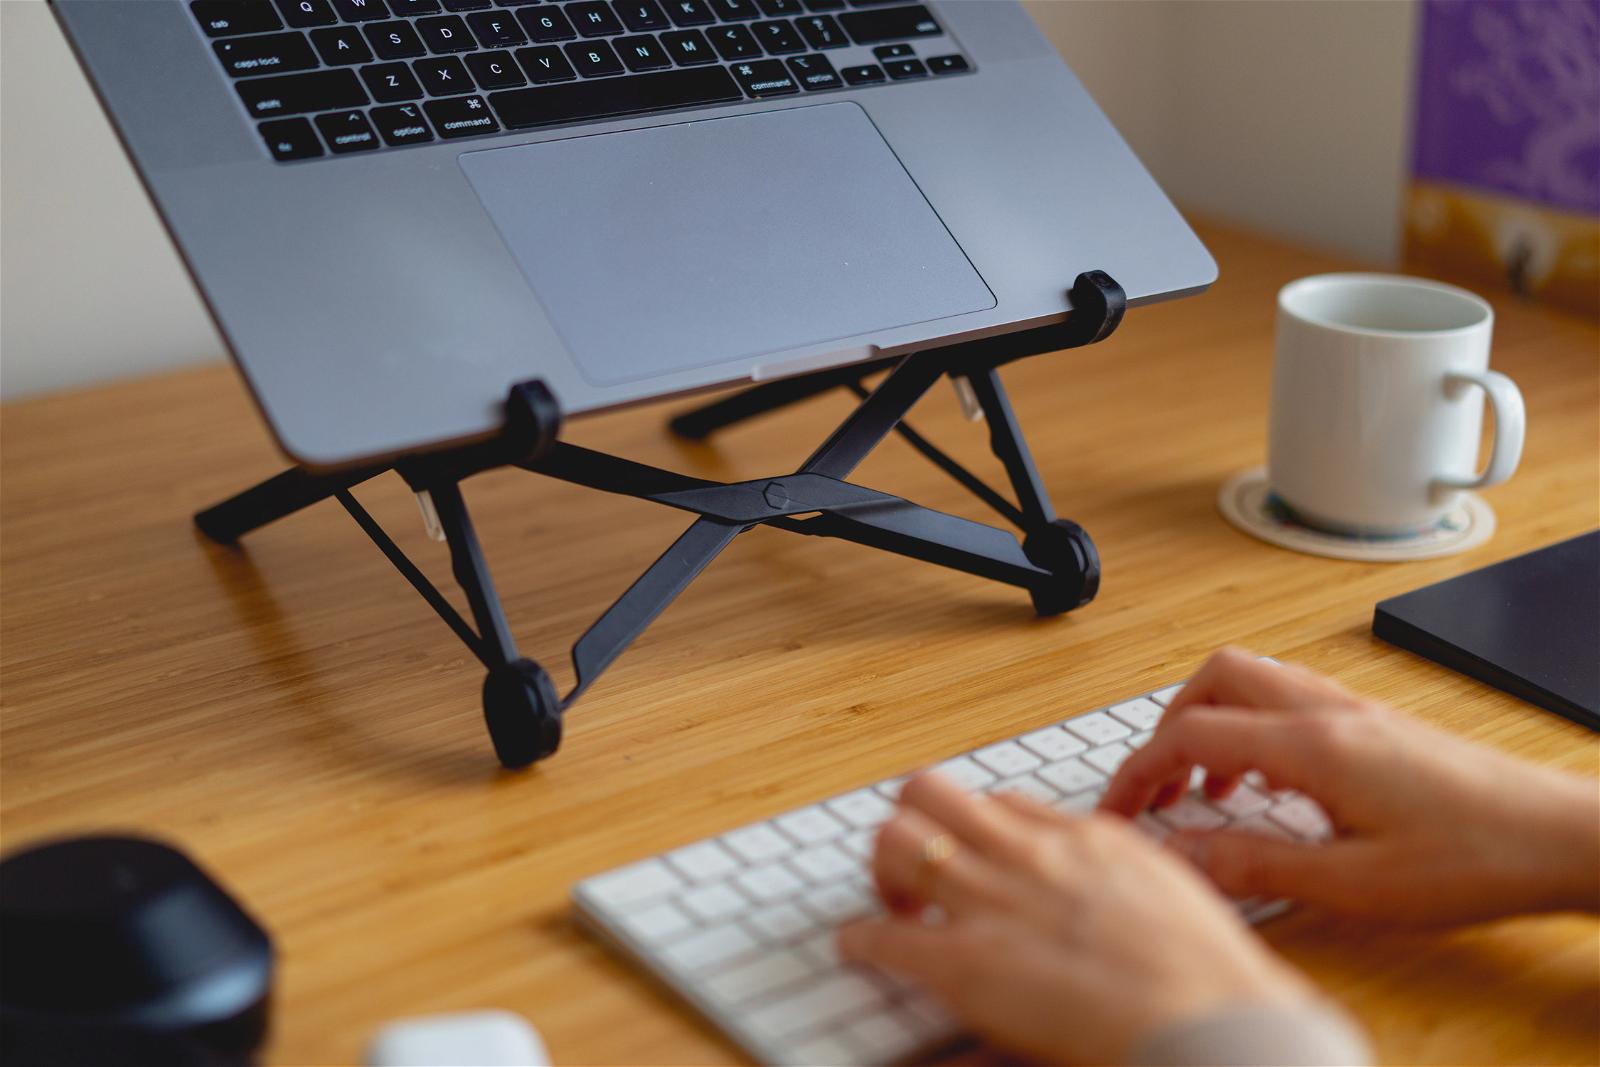 Roost Laptop Stand Review: Thoughts After 5 Years of Use